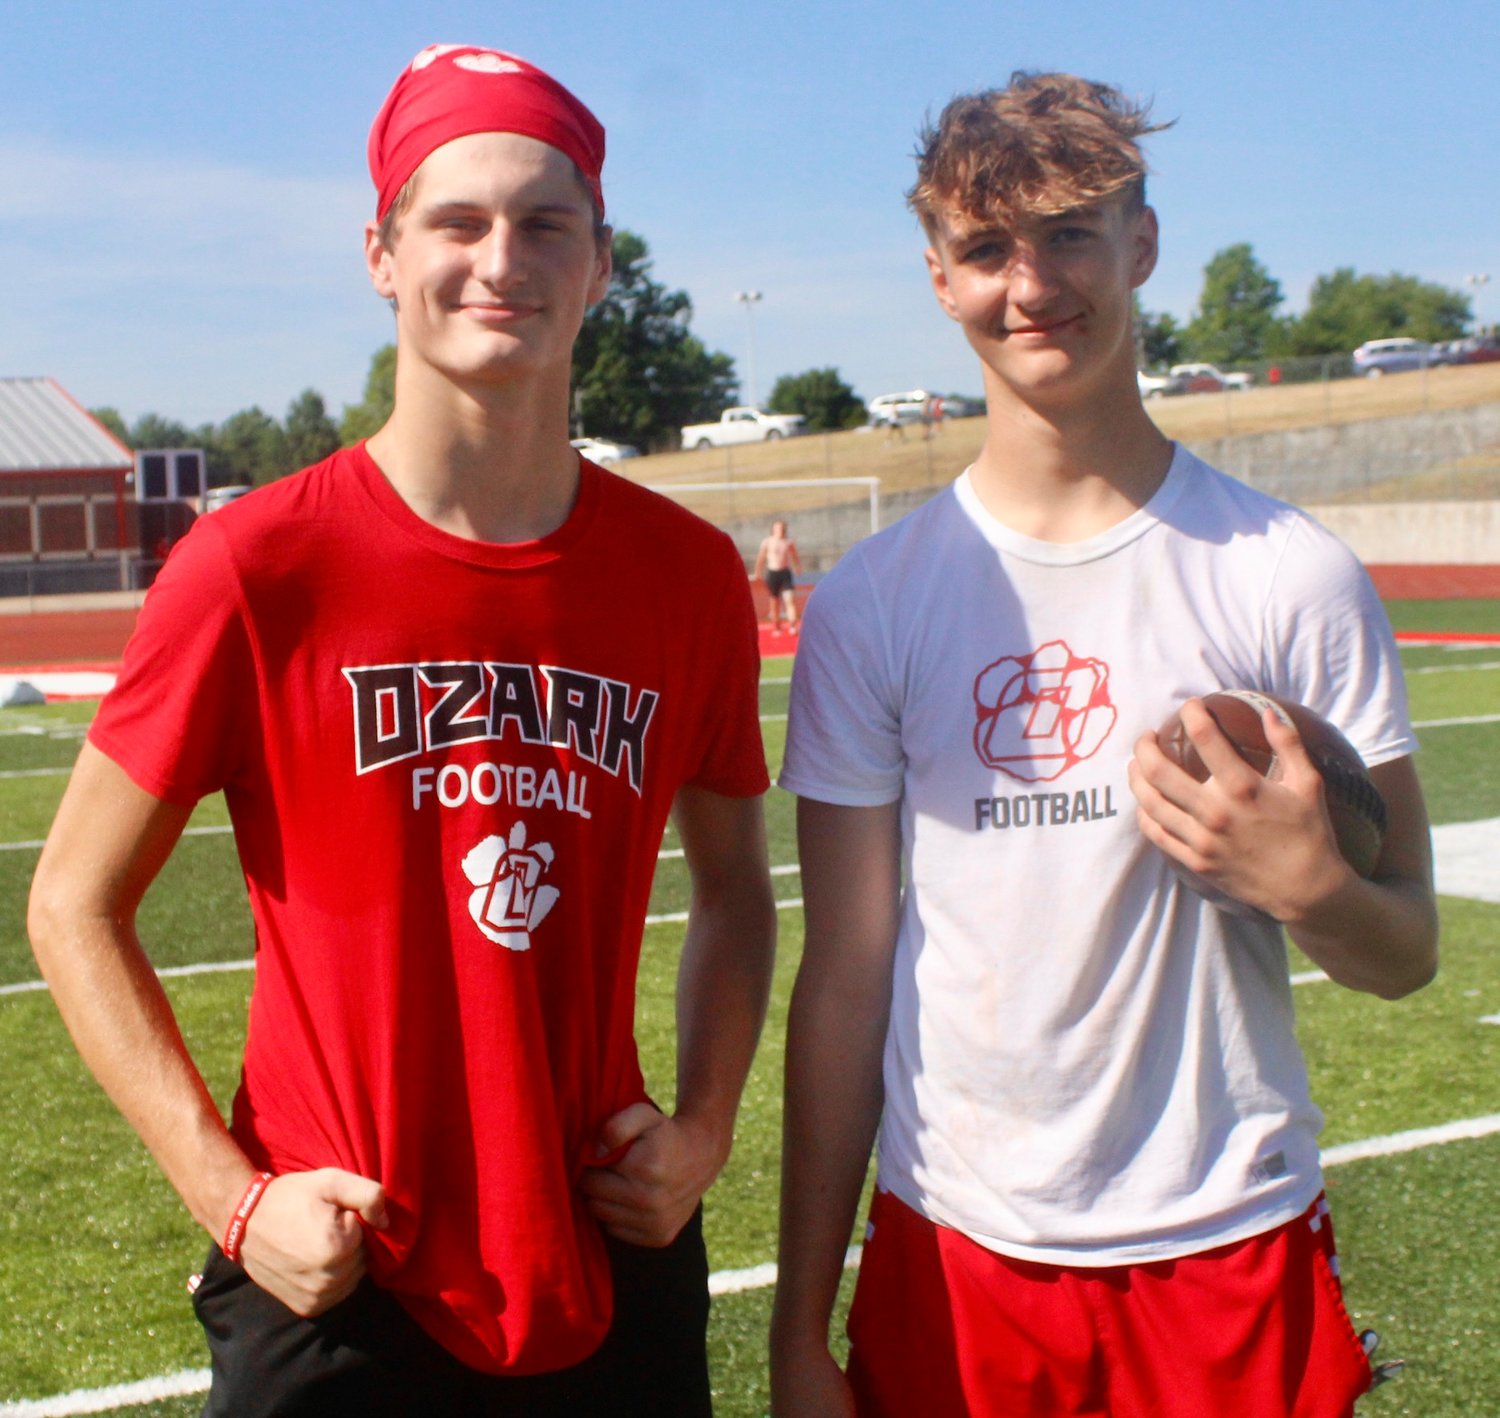 OZARK’S JACE
WHATLEY AND NICK ROHRBAUGH will lead the Tigers
into their season opener Aug. 26 versus Carl Junction.